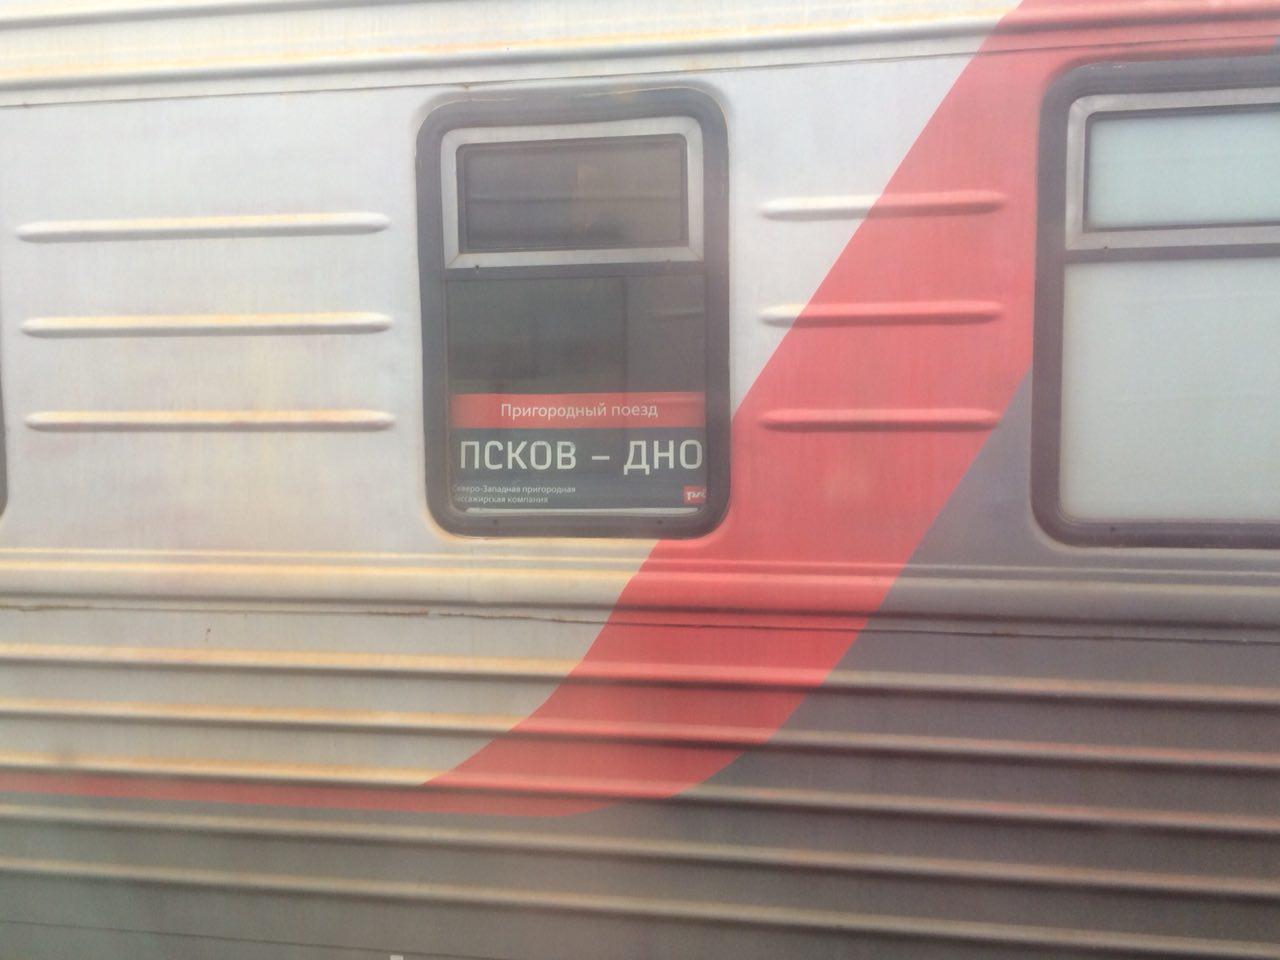 Here's where they don't come back. - A train, Pskov, Hopelessness